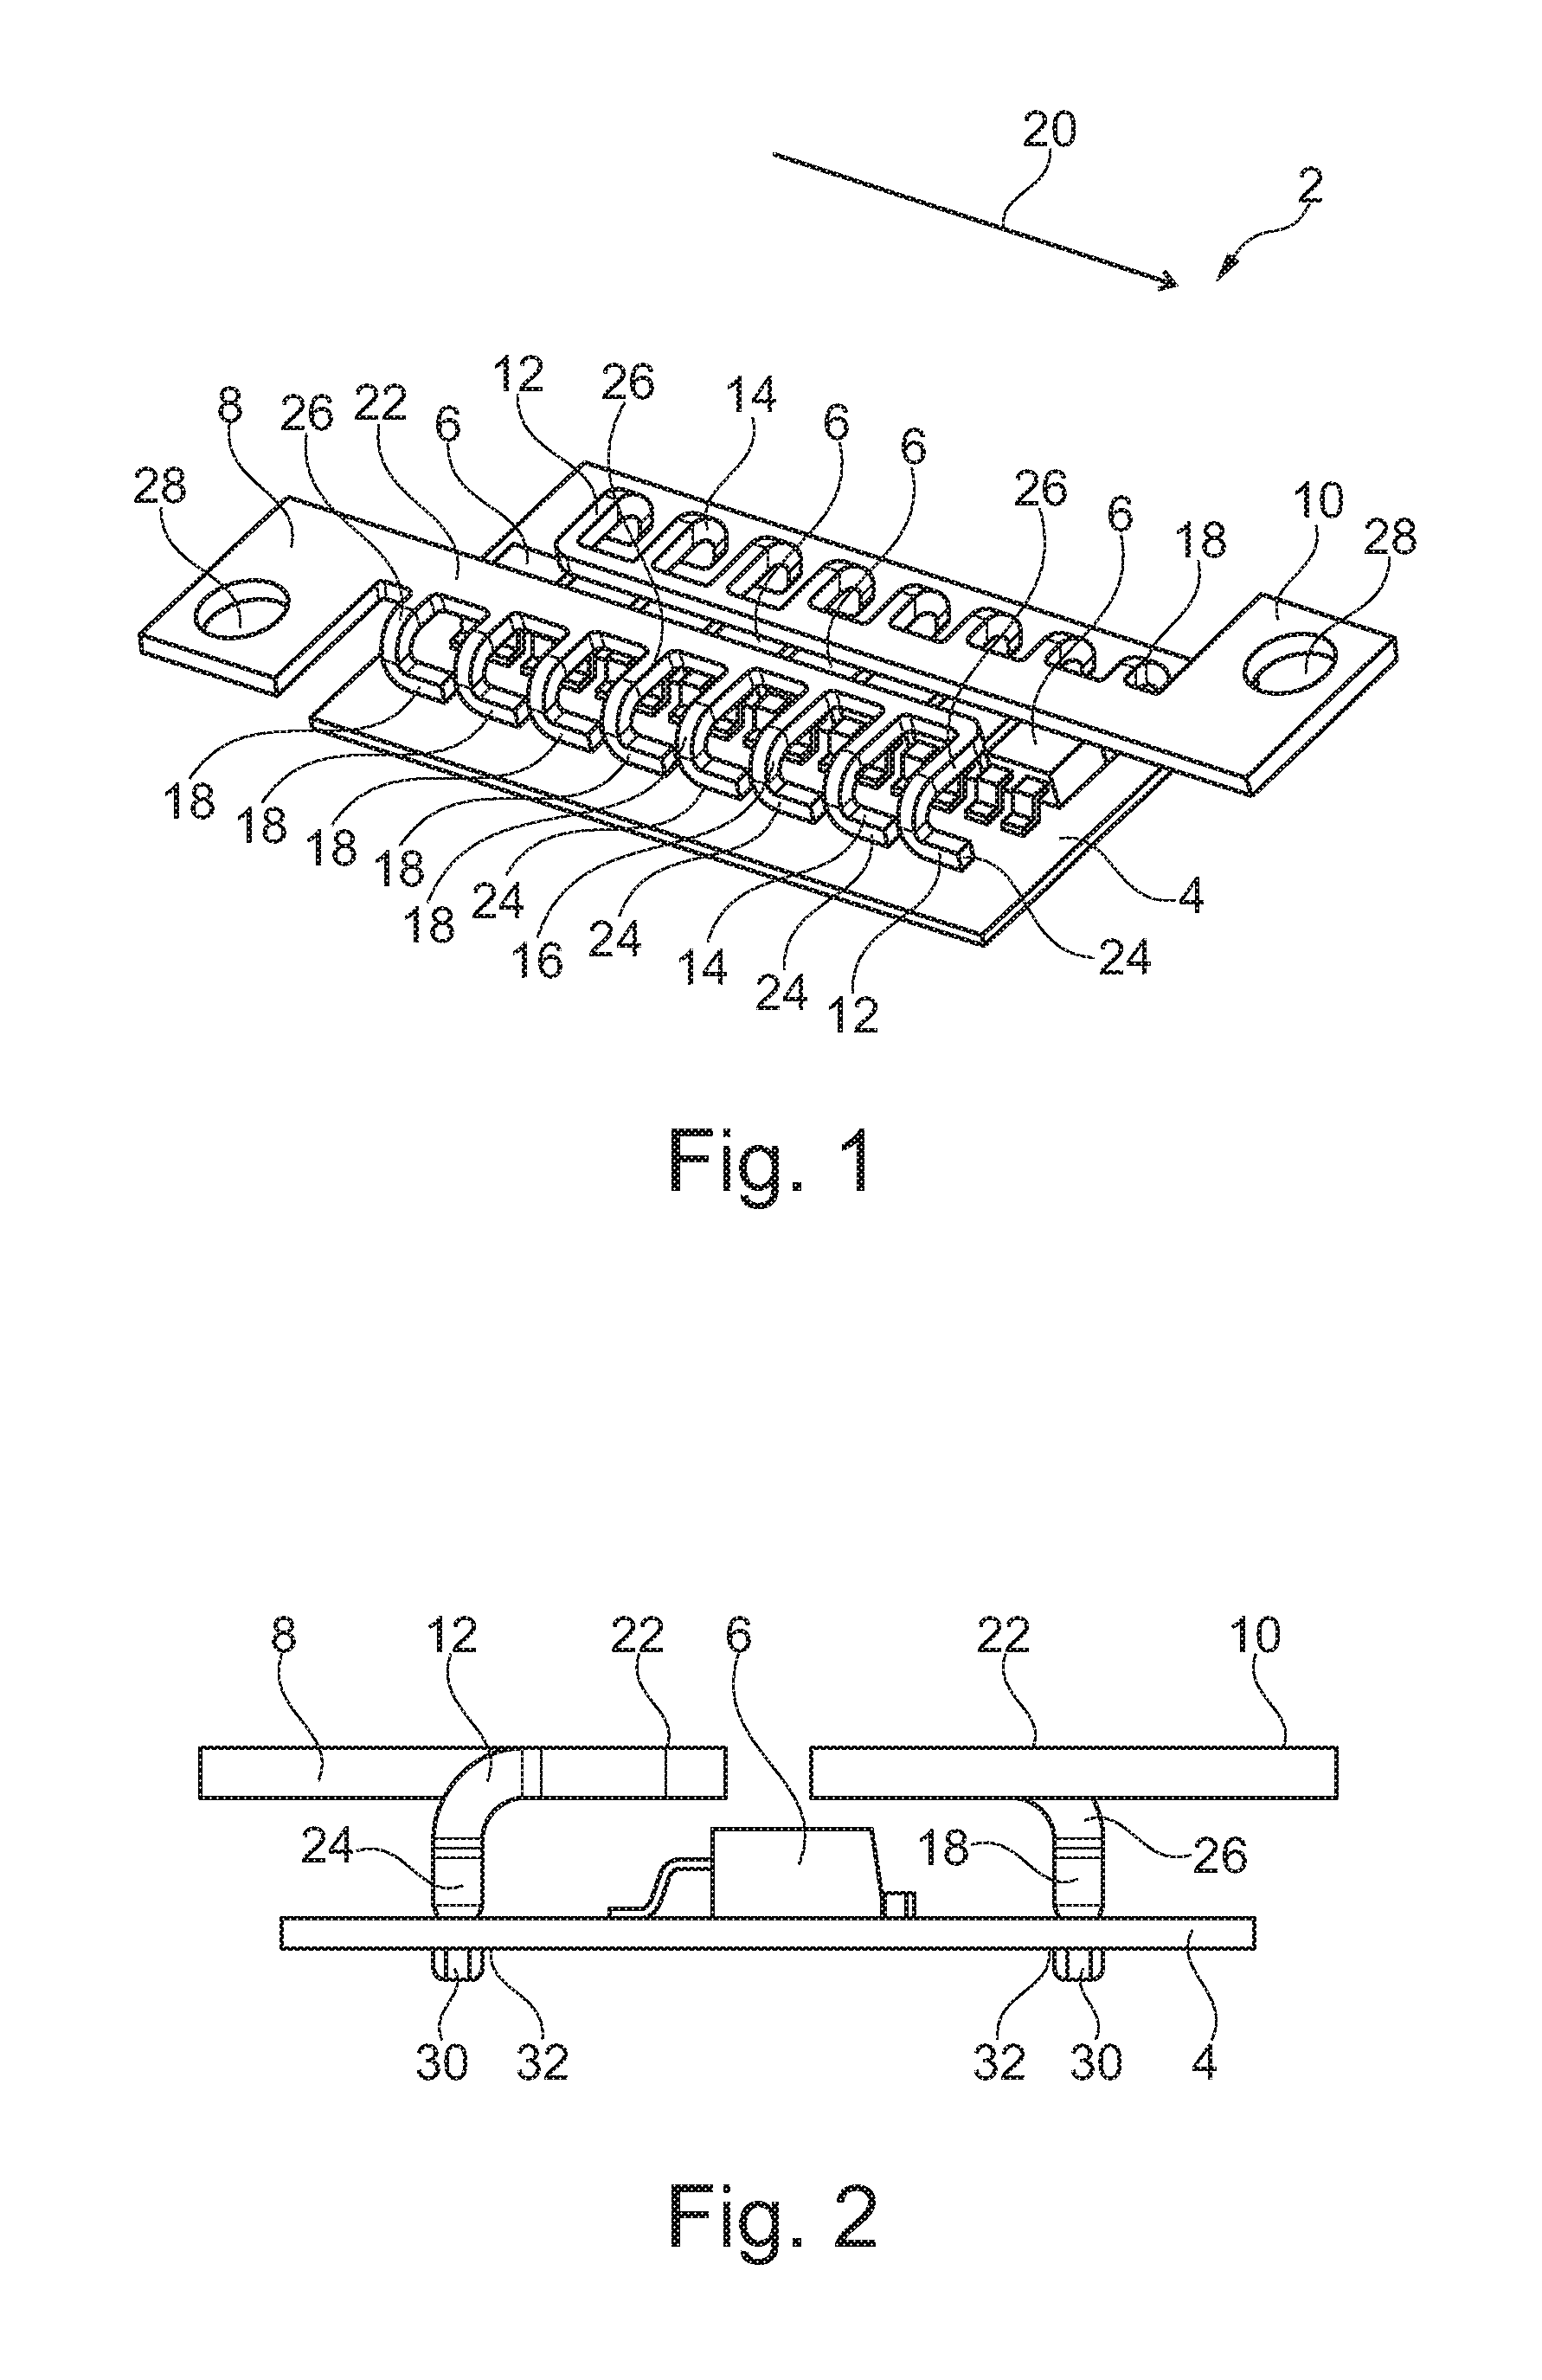 High-current electrical circuit having a circuit board and a busbar